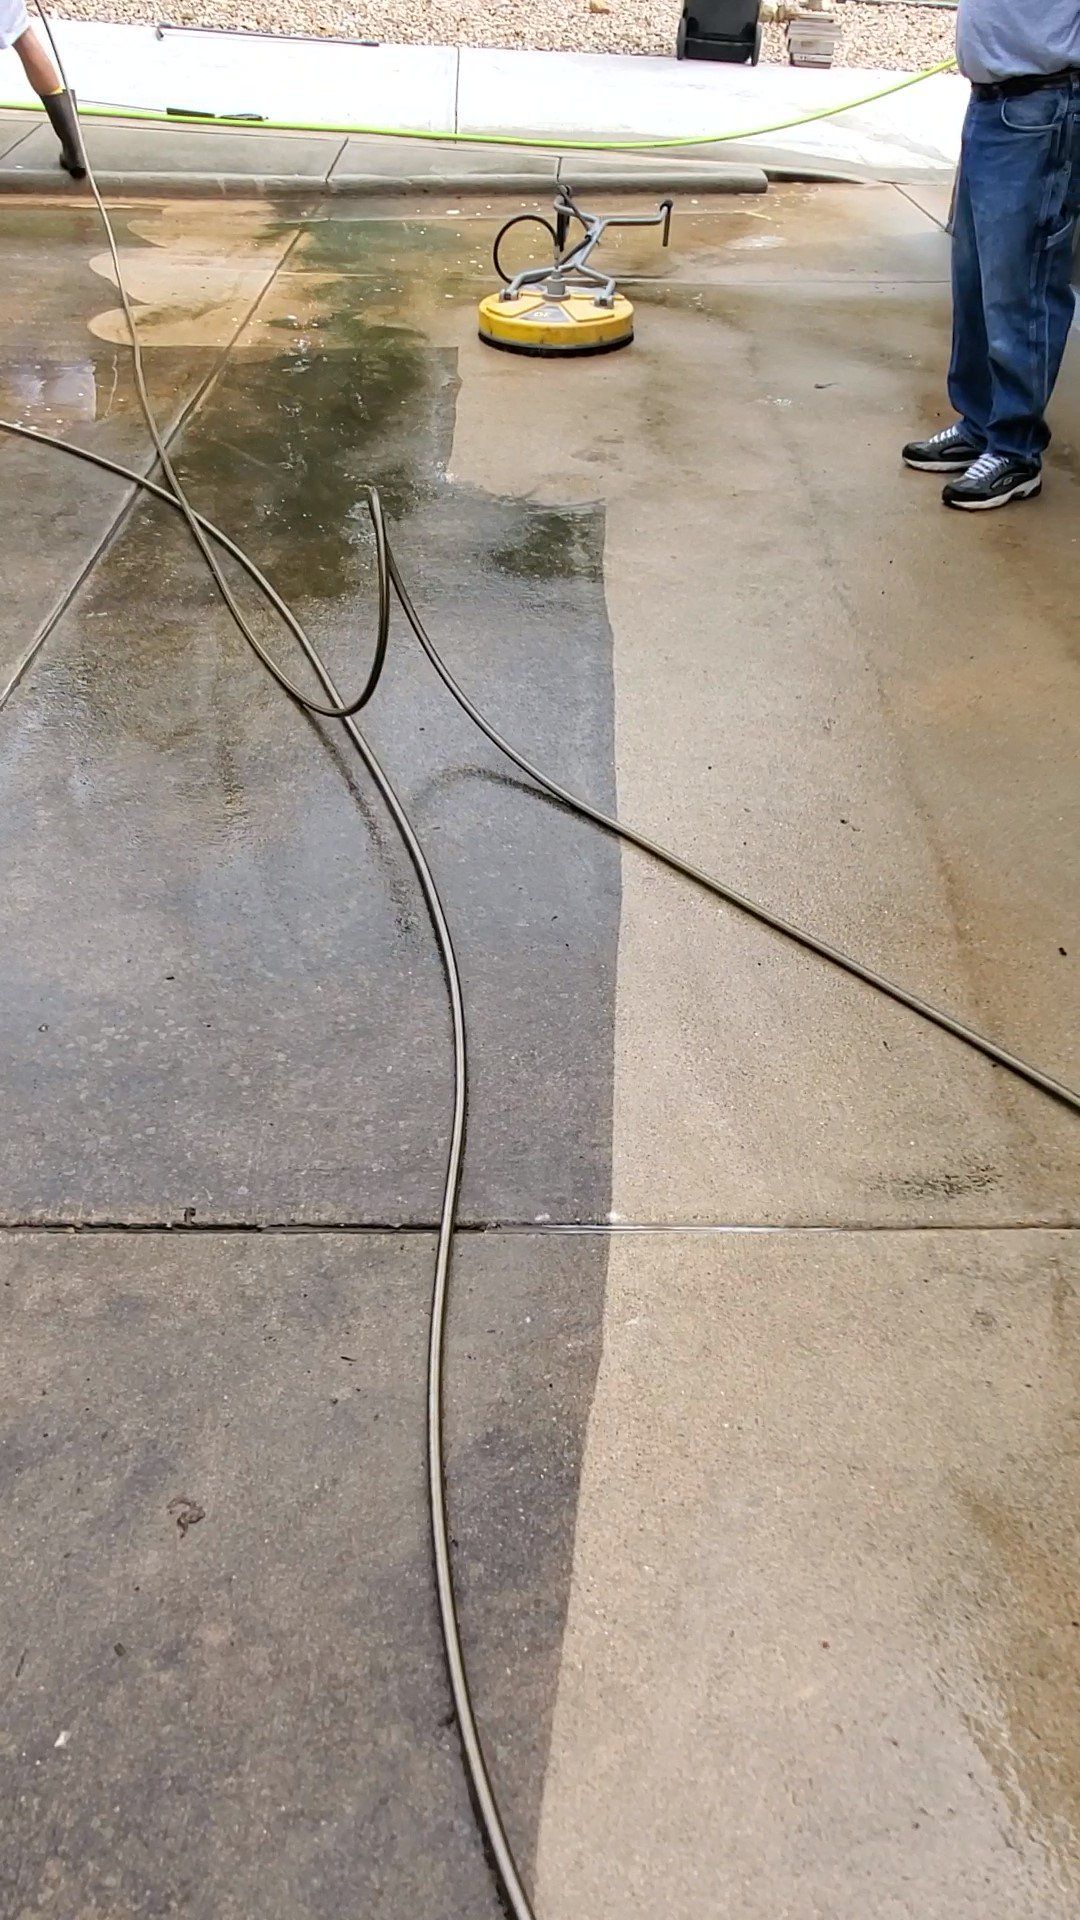 A man is cleaning a concrete driveway with a pressure washer.